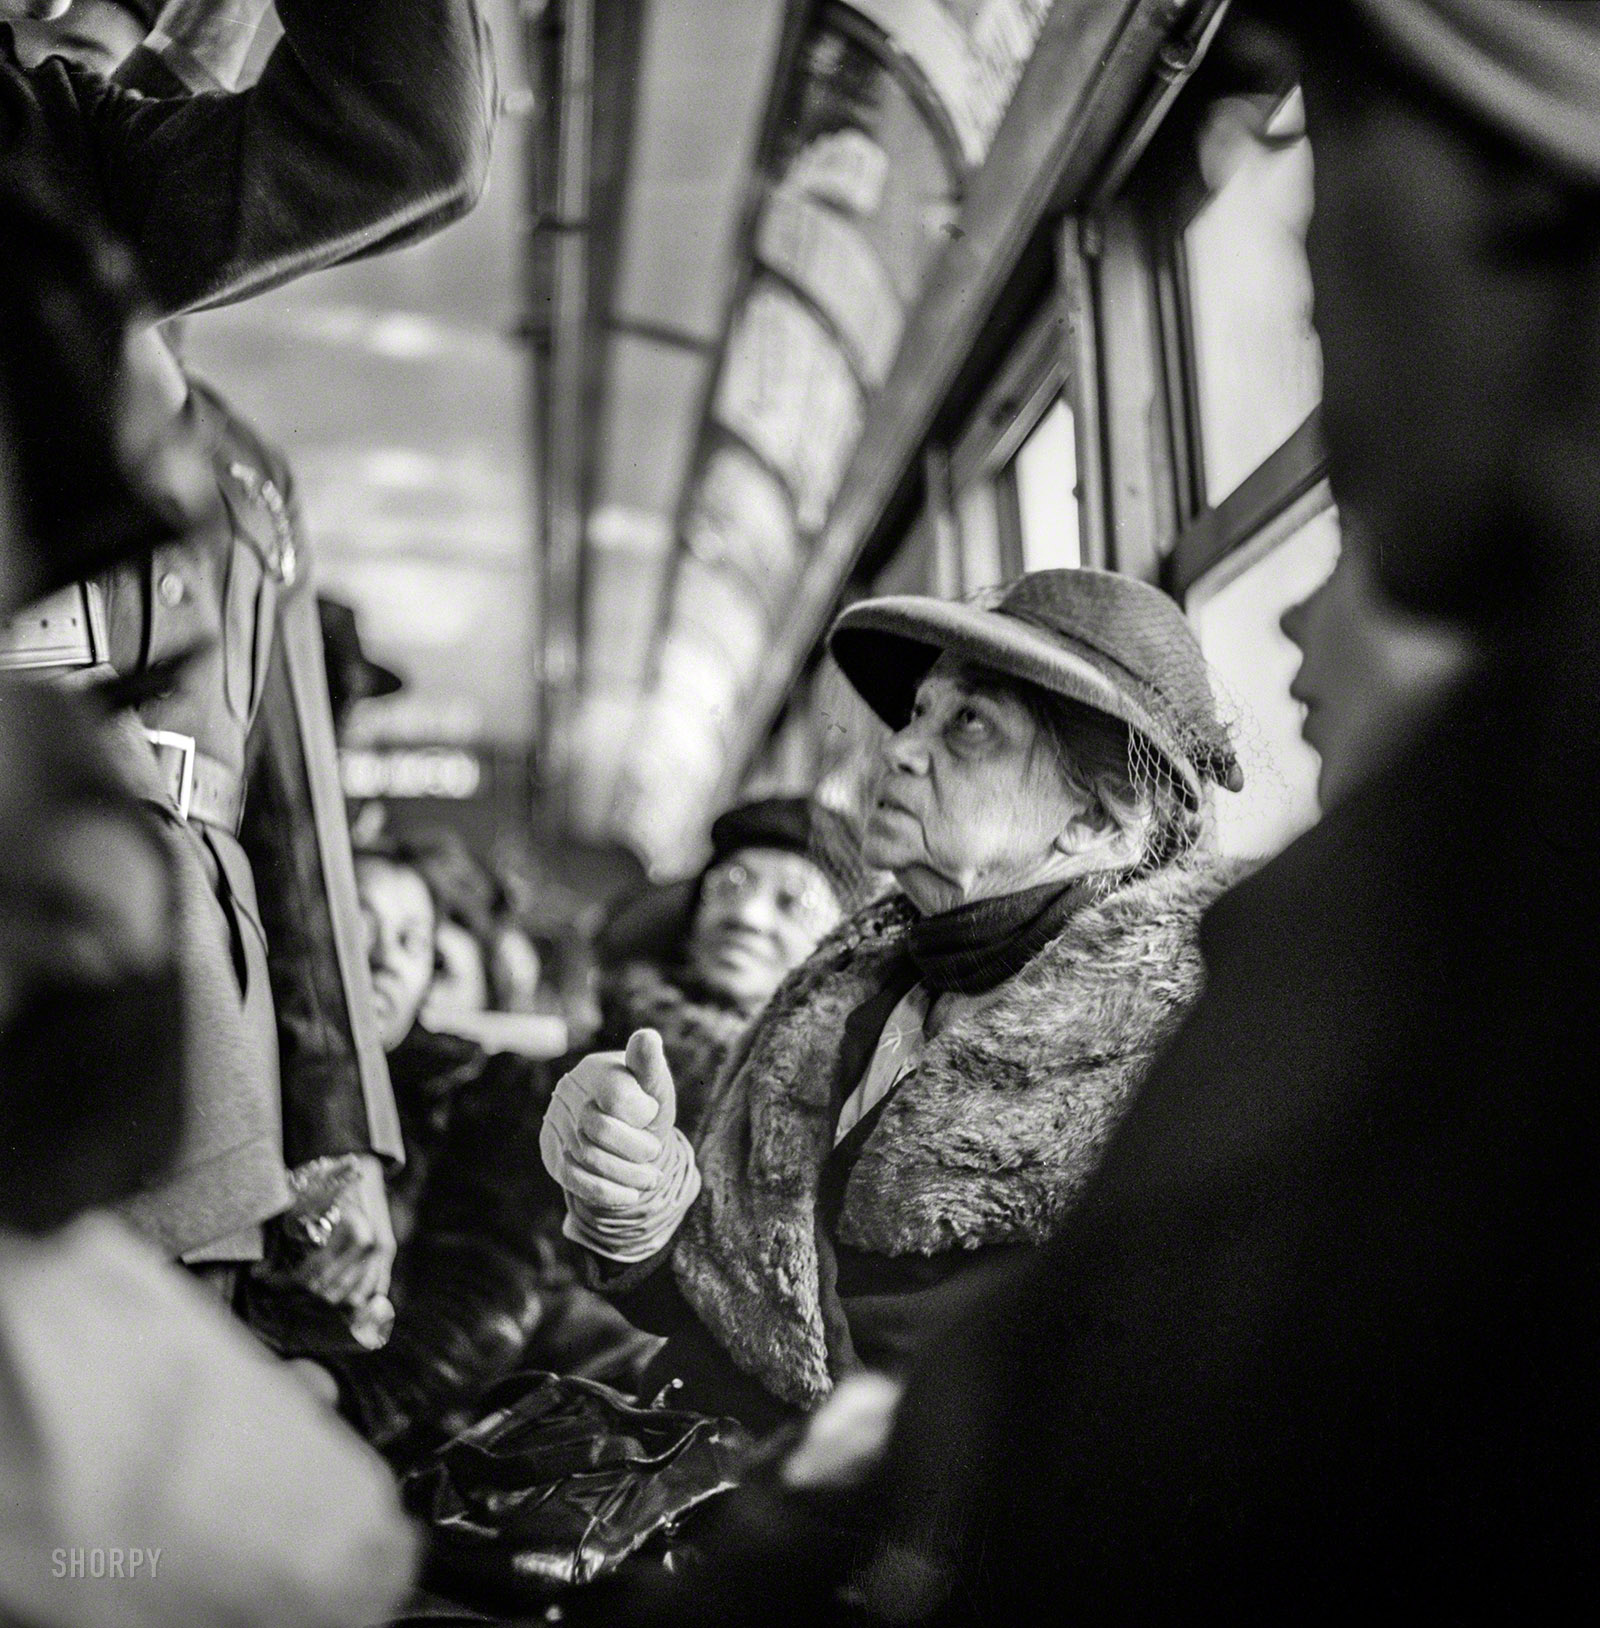 March 1943. "Washington, D.C. -- Riding on a streetcar." More hats with netting! Photo by Esther Bubley for the Office of War Information. View full size.